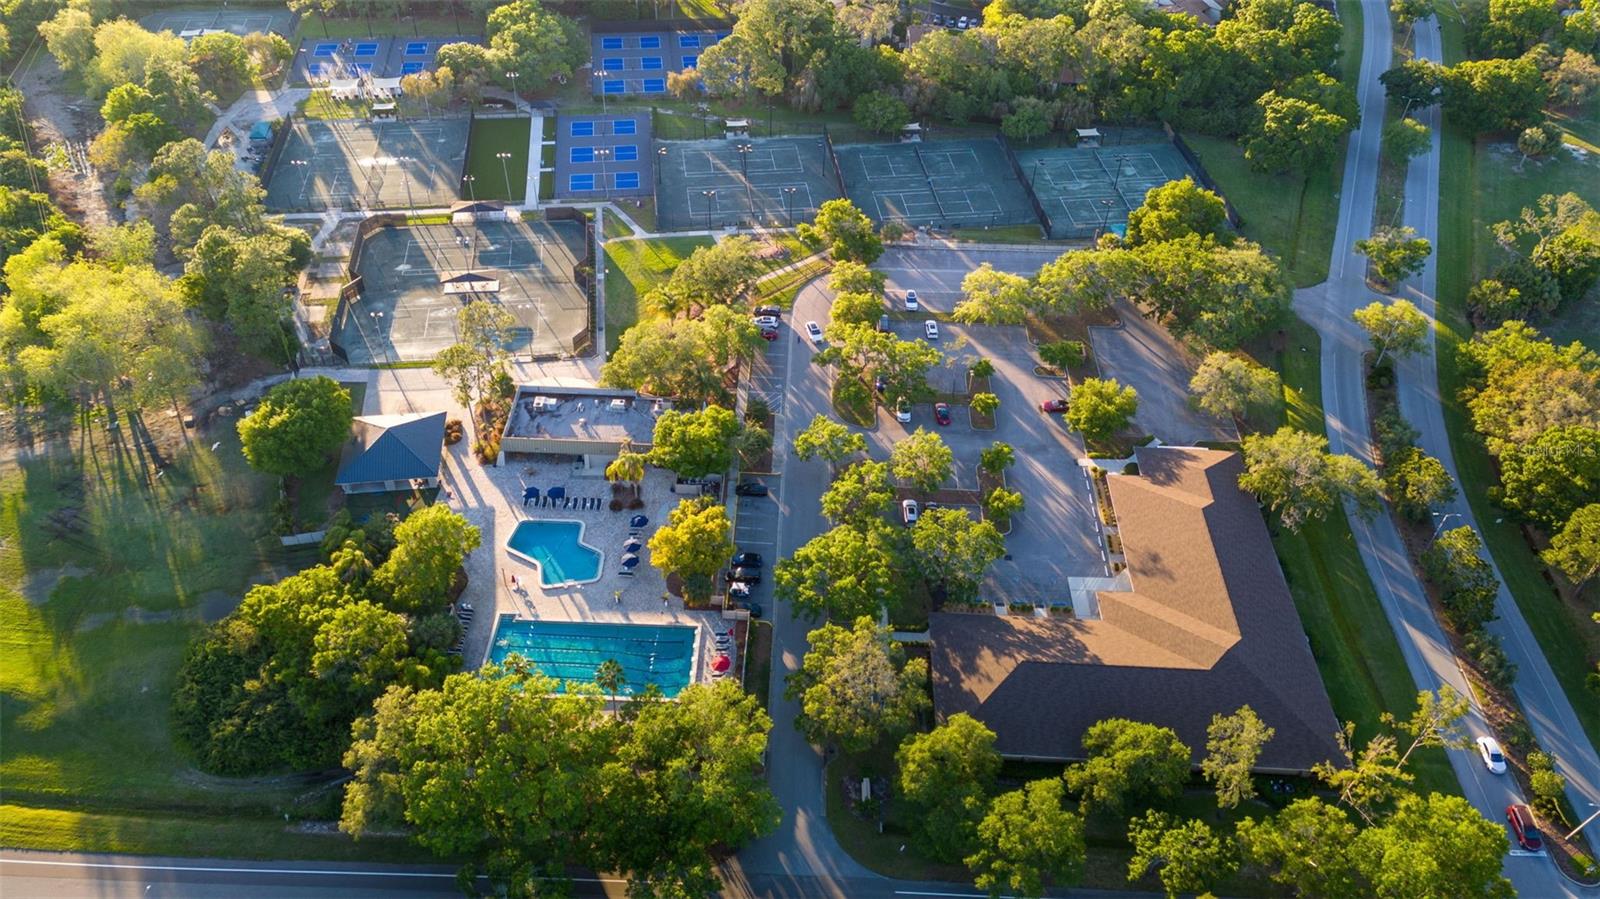 HOA Amenity - Aerial view of pool, tennis and pickle ball courts